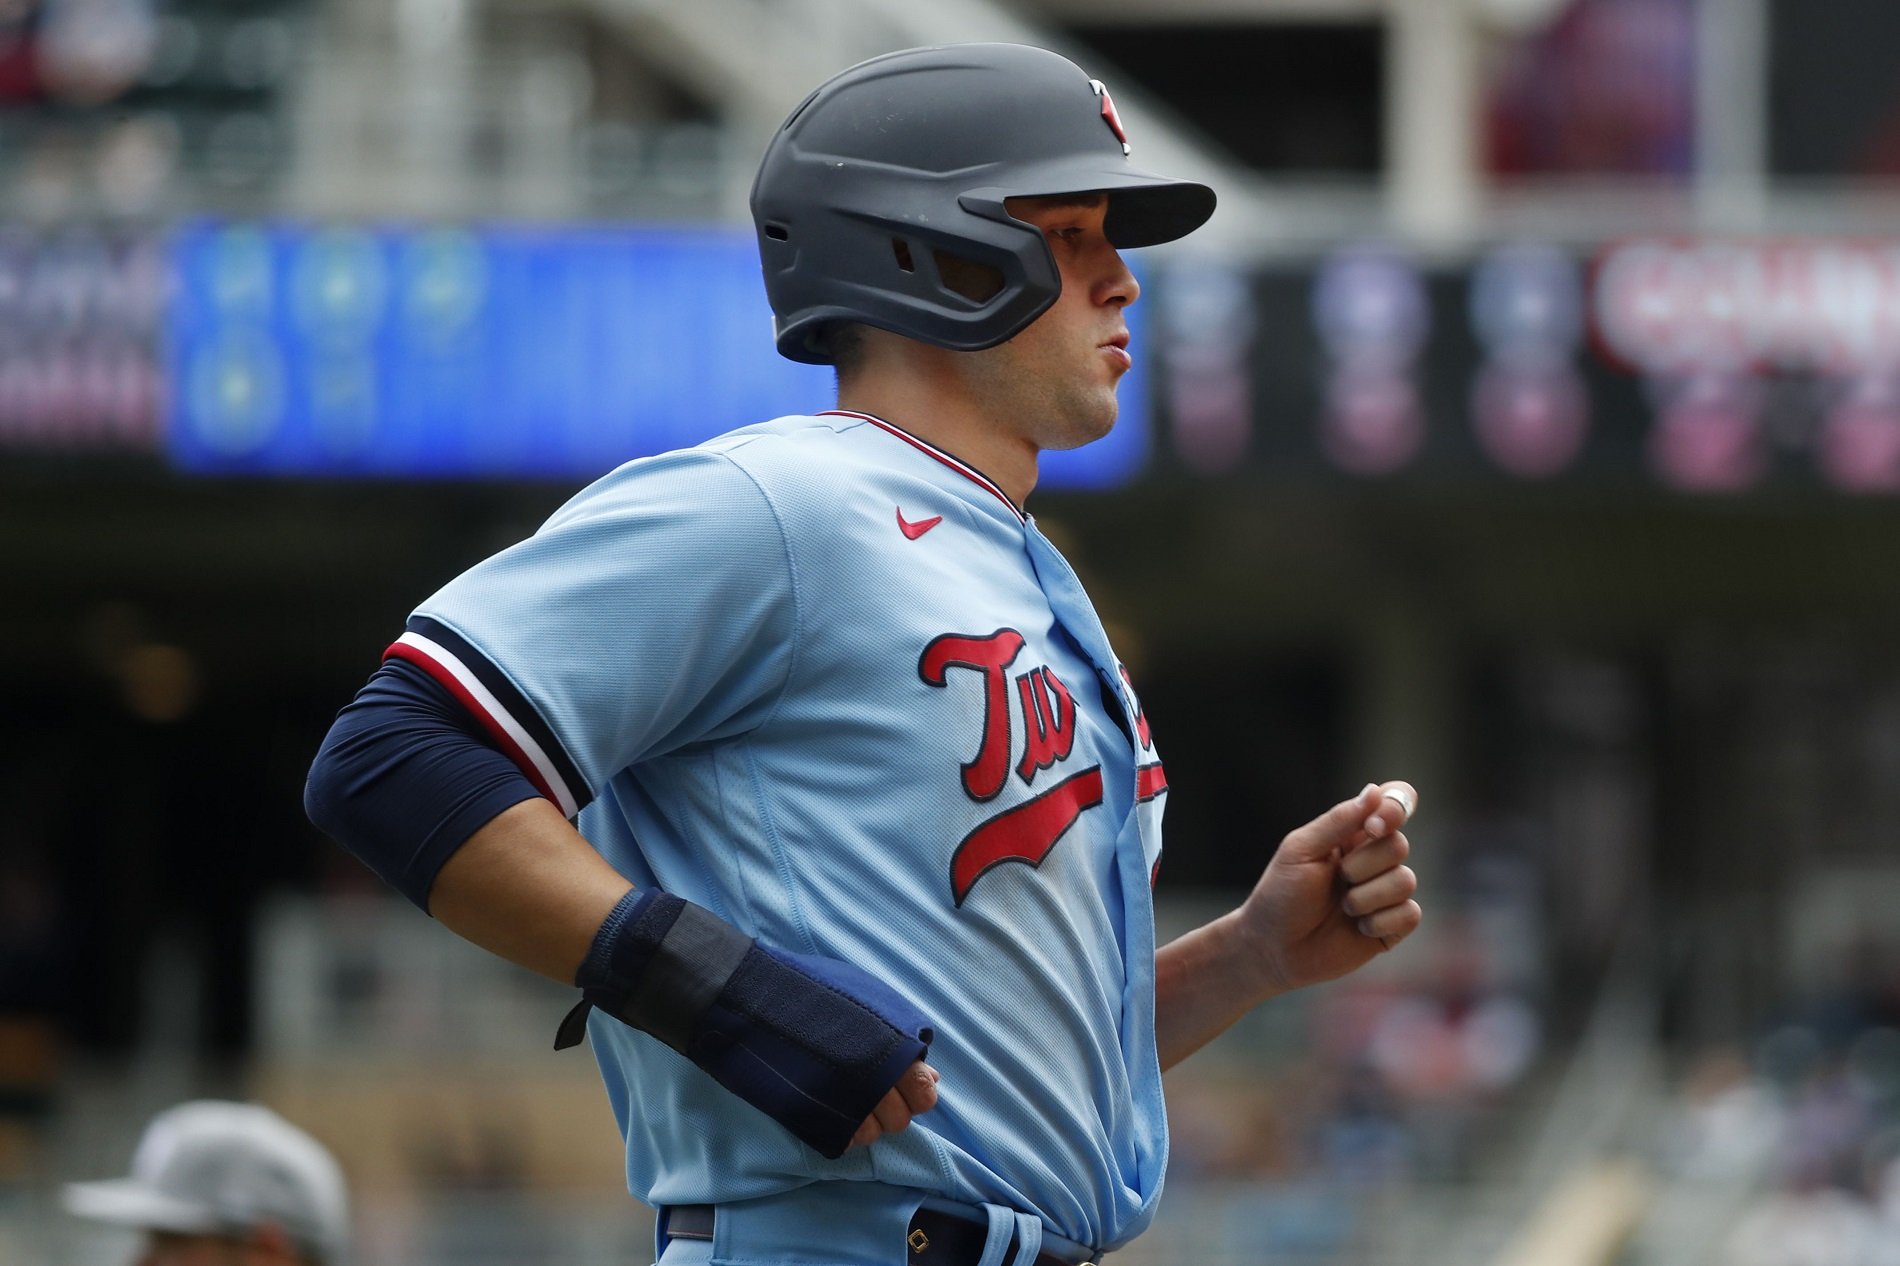 Alex Kirilloff, the Twins' unflappable prospect, is ready for his